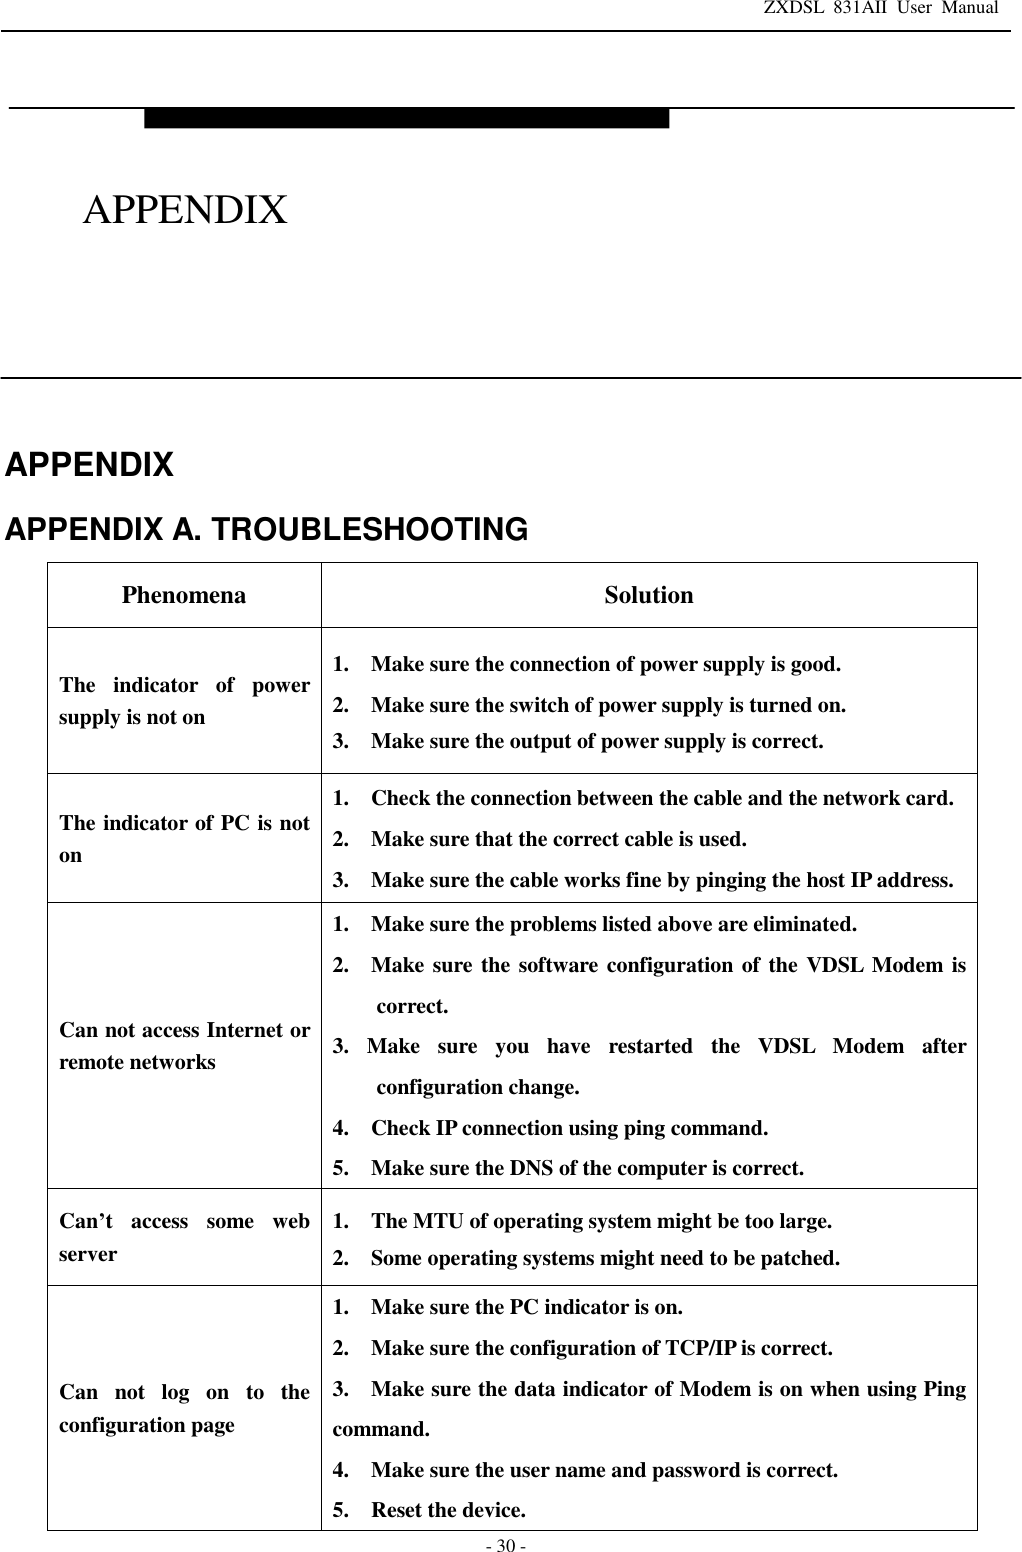 ZXDSL 831AII User Manual  - 30 -  APPENDIX APPENDIX A. TROUBLESHOOTING Phenomena  Solution The indicator of power supply is not on   1.  Make sure the connection of power supply is good. 2.  Make sure the switch of power supply is turned on. 3.  Make sure the output of power supply is correct. The indicator of PC is not on 1.  Check the connection between the cable and the network card. 2.  Make sure that the correct cable is used. 3.  Make sure the cable works fine by pinging the host IP address. Can not access Internet or remote networks 1.  Make sure the problems listed above are eliminated. 2.  Make sure the software configuration of the VDSL Modem is correct. 3. Make sure you have restarted the VDSL Modem after configuration change. 4.  Check IP connection using ping command. 5.  Make sure the DNS of the computer is correct.  Can’t access some web server 1.  The MTU of operating system might be too large. 2.  Some operating systems might need to be patched. Can not log on to the configuration page 1.  Make sure the PC indicator is on. 2.  Make sure the configuration of TCP/IP is correct. 3.  Make sure the data indicator of Modem is on when using Ping command. 4.  Make sure the user name and password is correct. 5.  Reset the device.  APPENDIX 